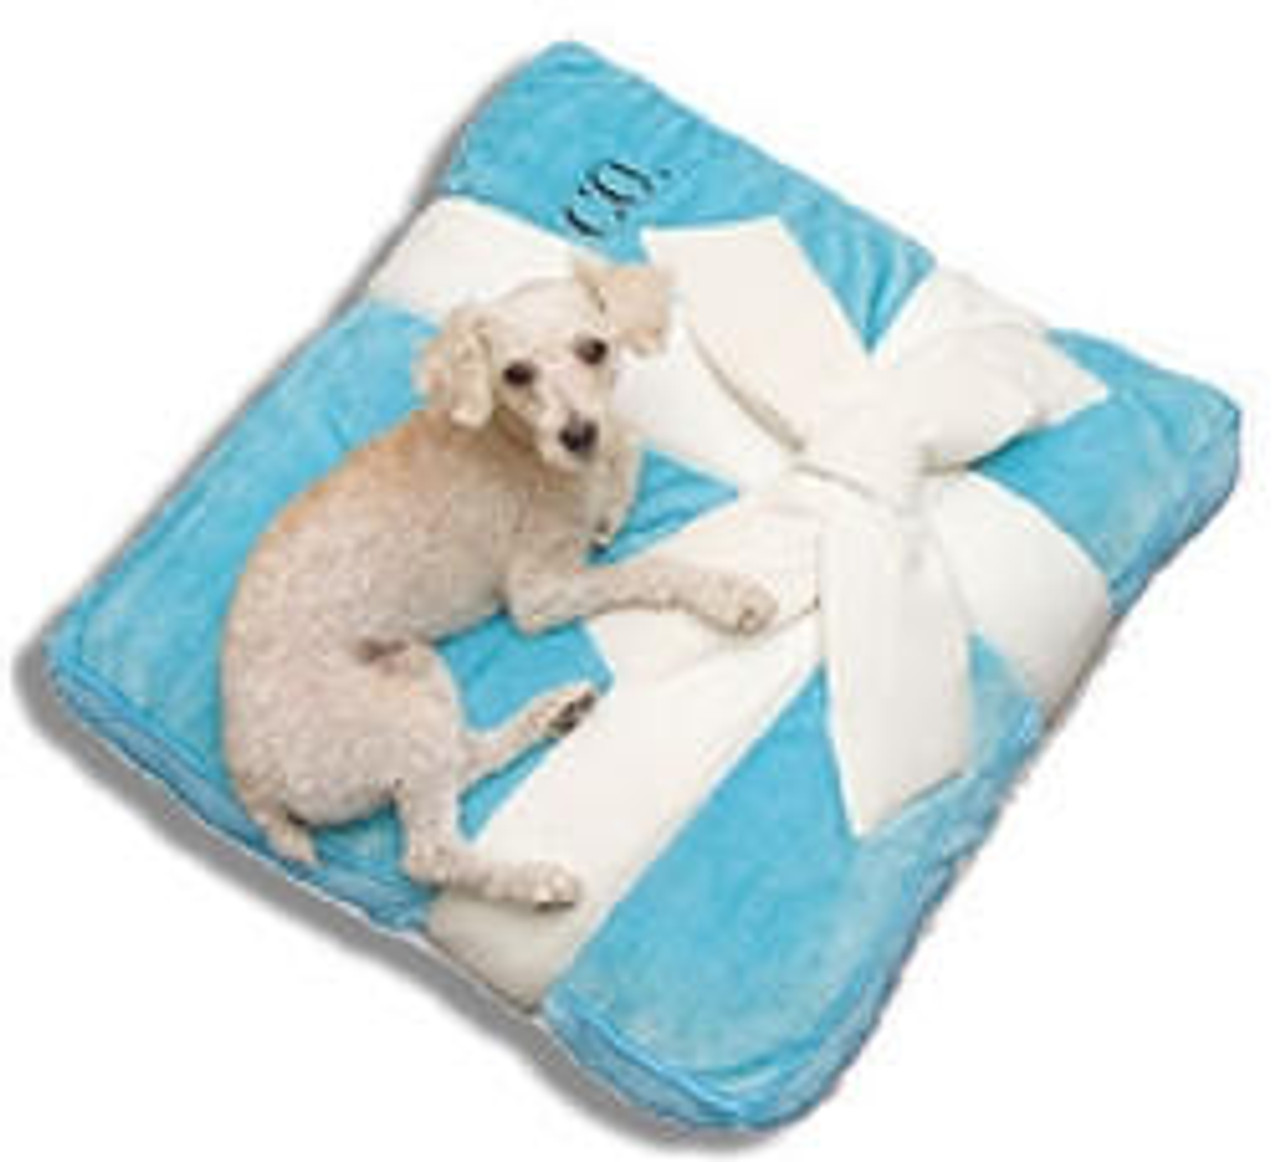 Chewy Vuiton Bed - The New York Dog Shop